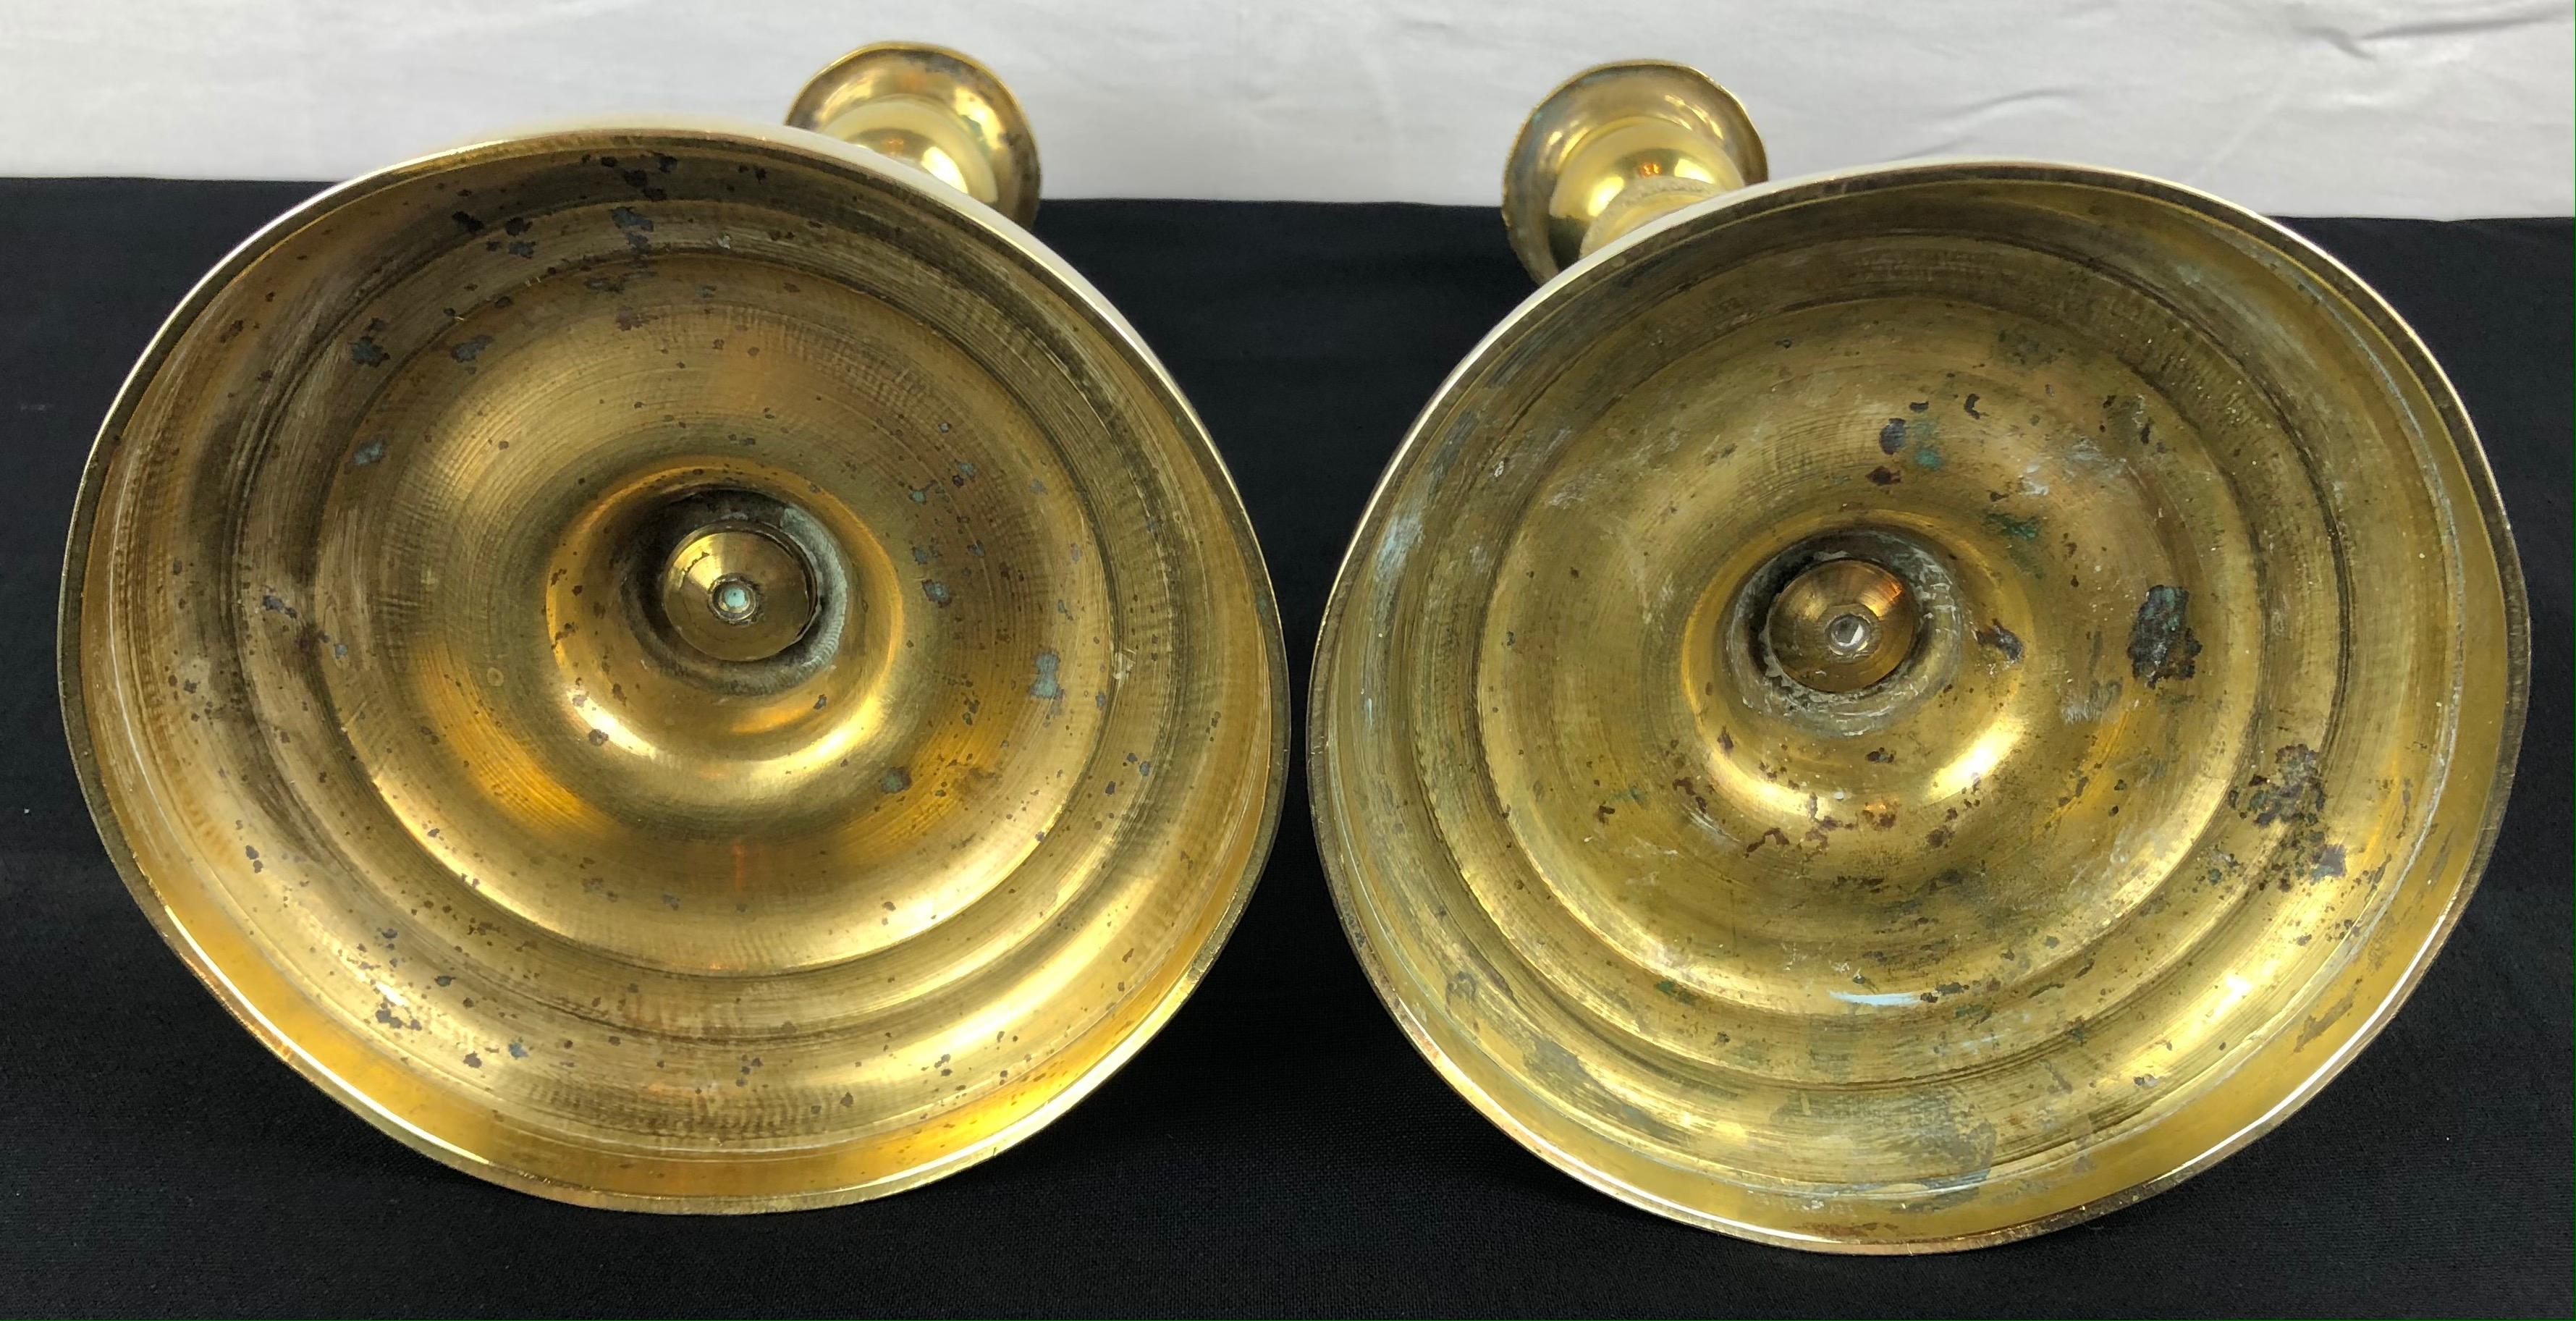 Fine Pair of Early 19th Century Empire Gilt Bronze Candlesticks In Good Condition For Sale In Miami, FL